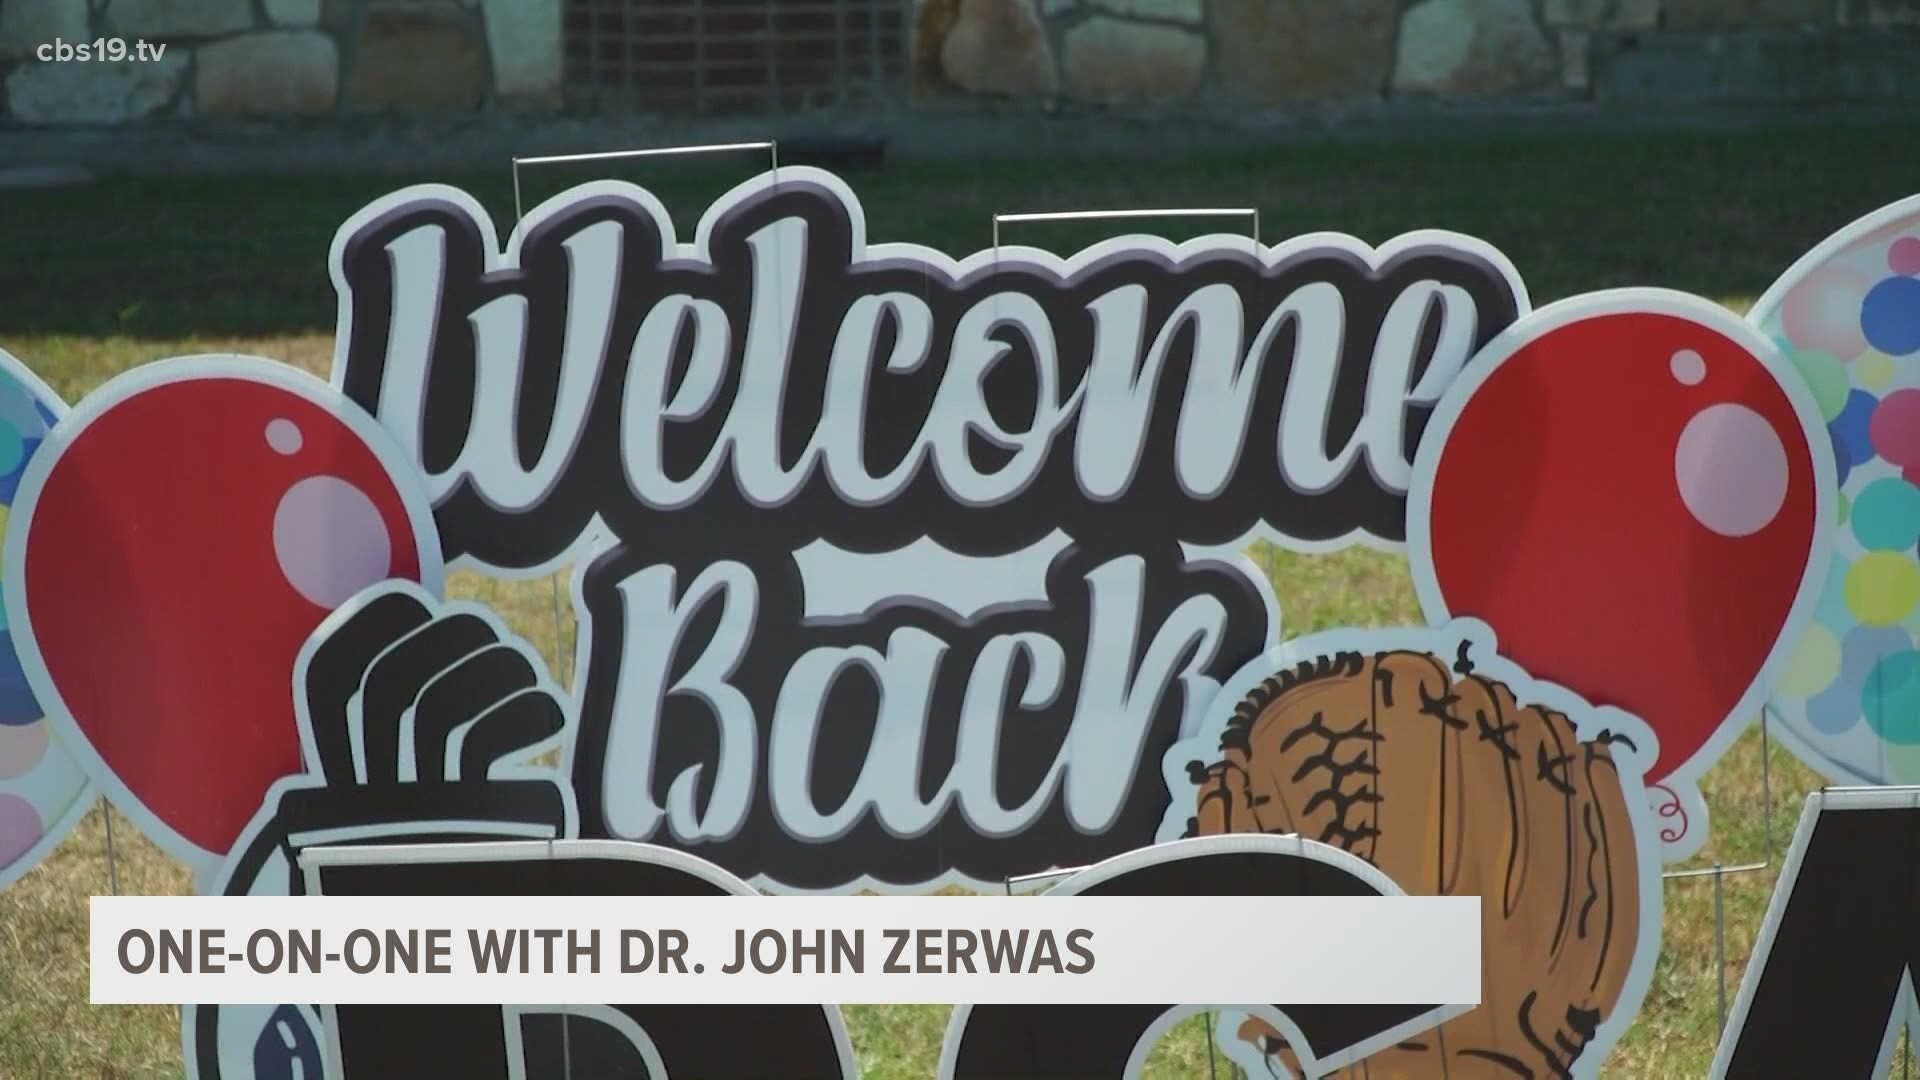 In a one-on-one interview, Dr. John Zerwas shared his thoughts on current case and hospitalization trends, and the start of the new school year.